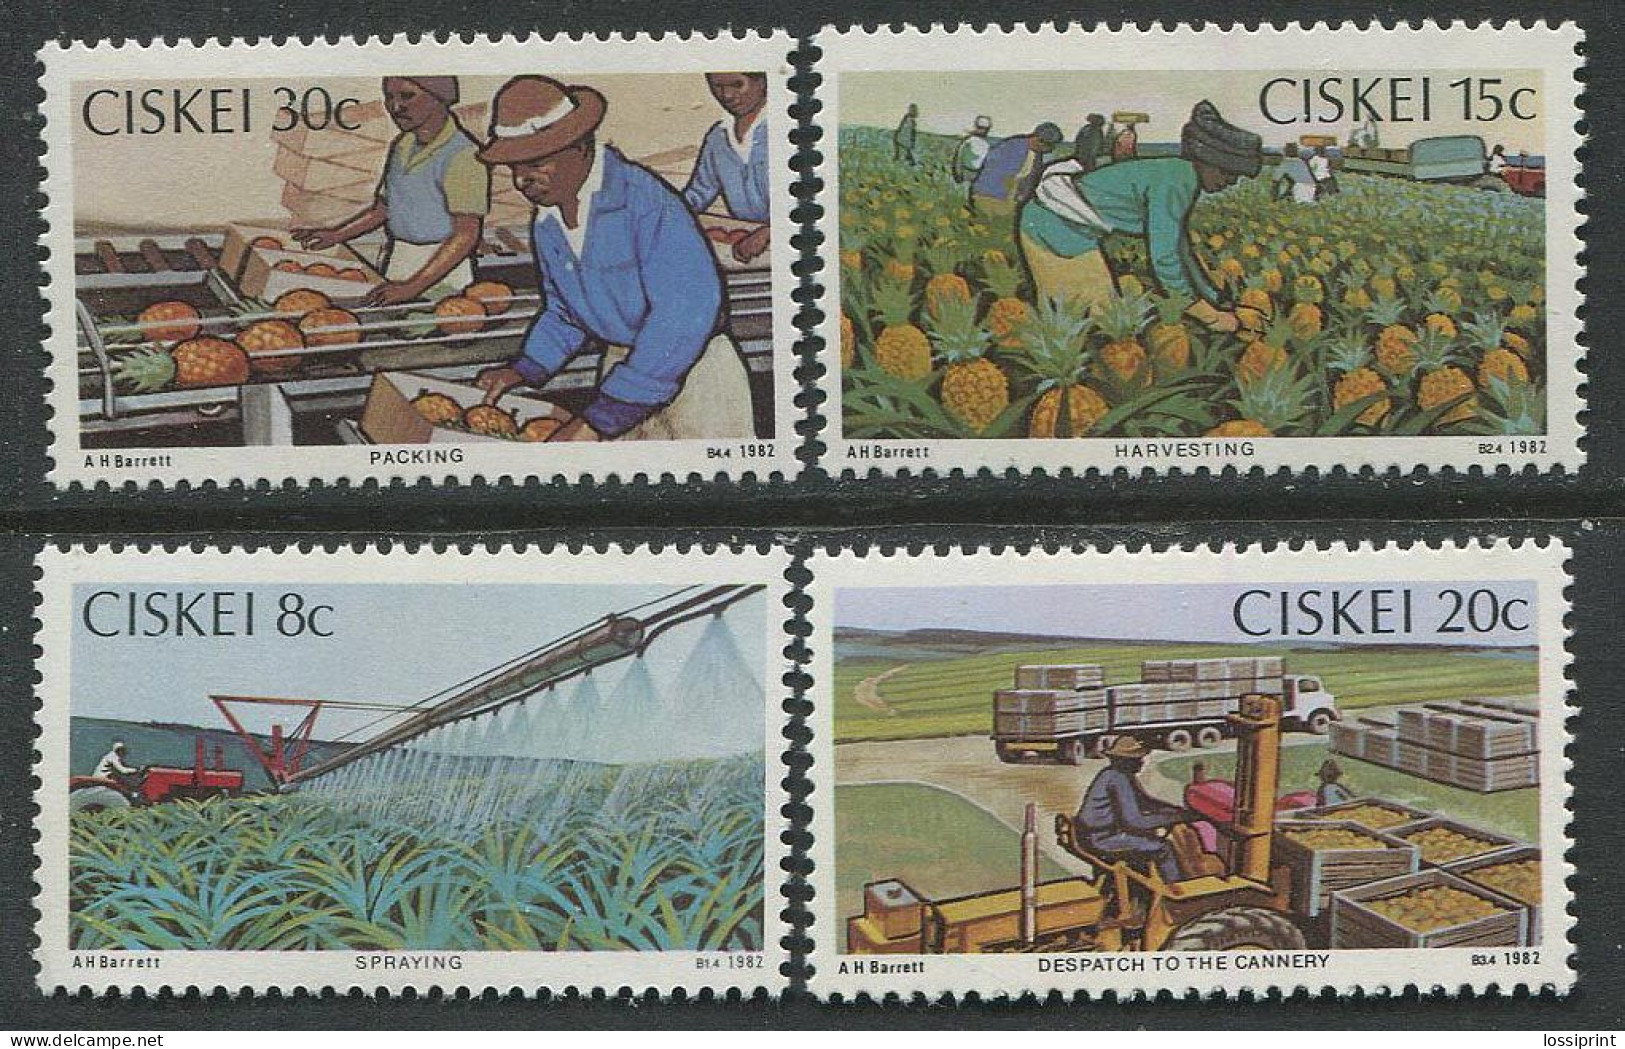 Ciskei:Unused Stamps Serie Packing, Harvesting, Spraying, Despatch To The Cannery, 1982, MNH - Ciskei